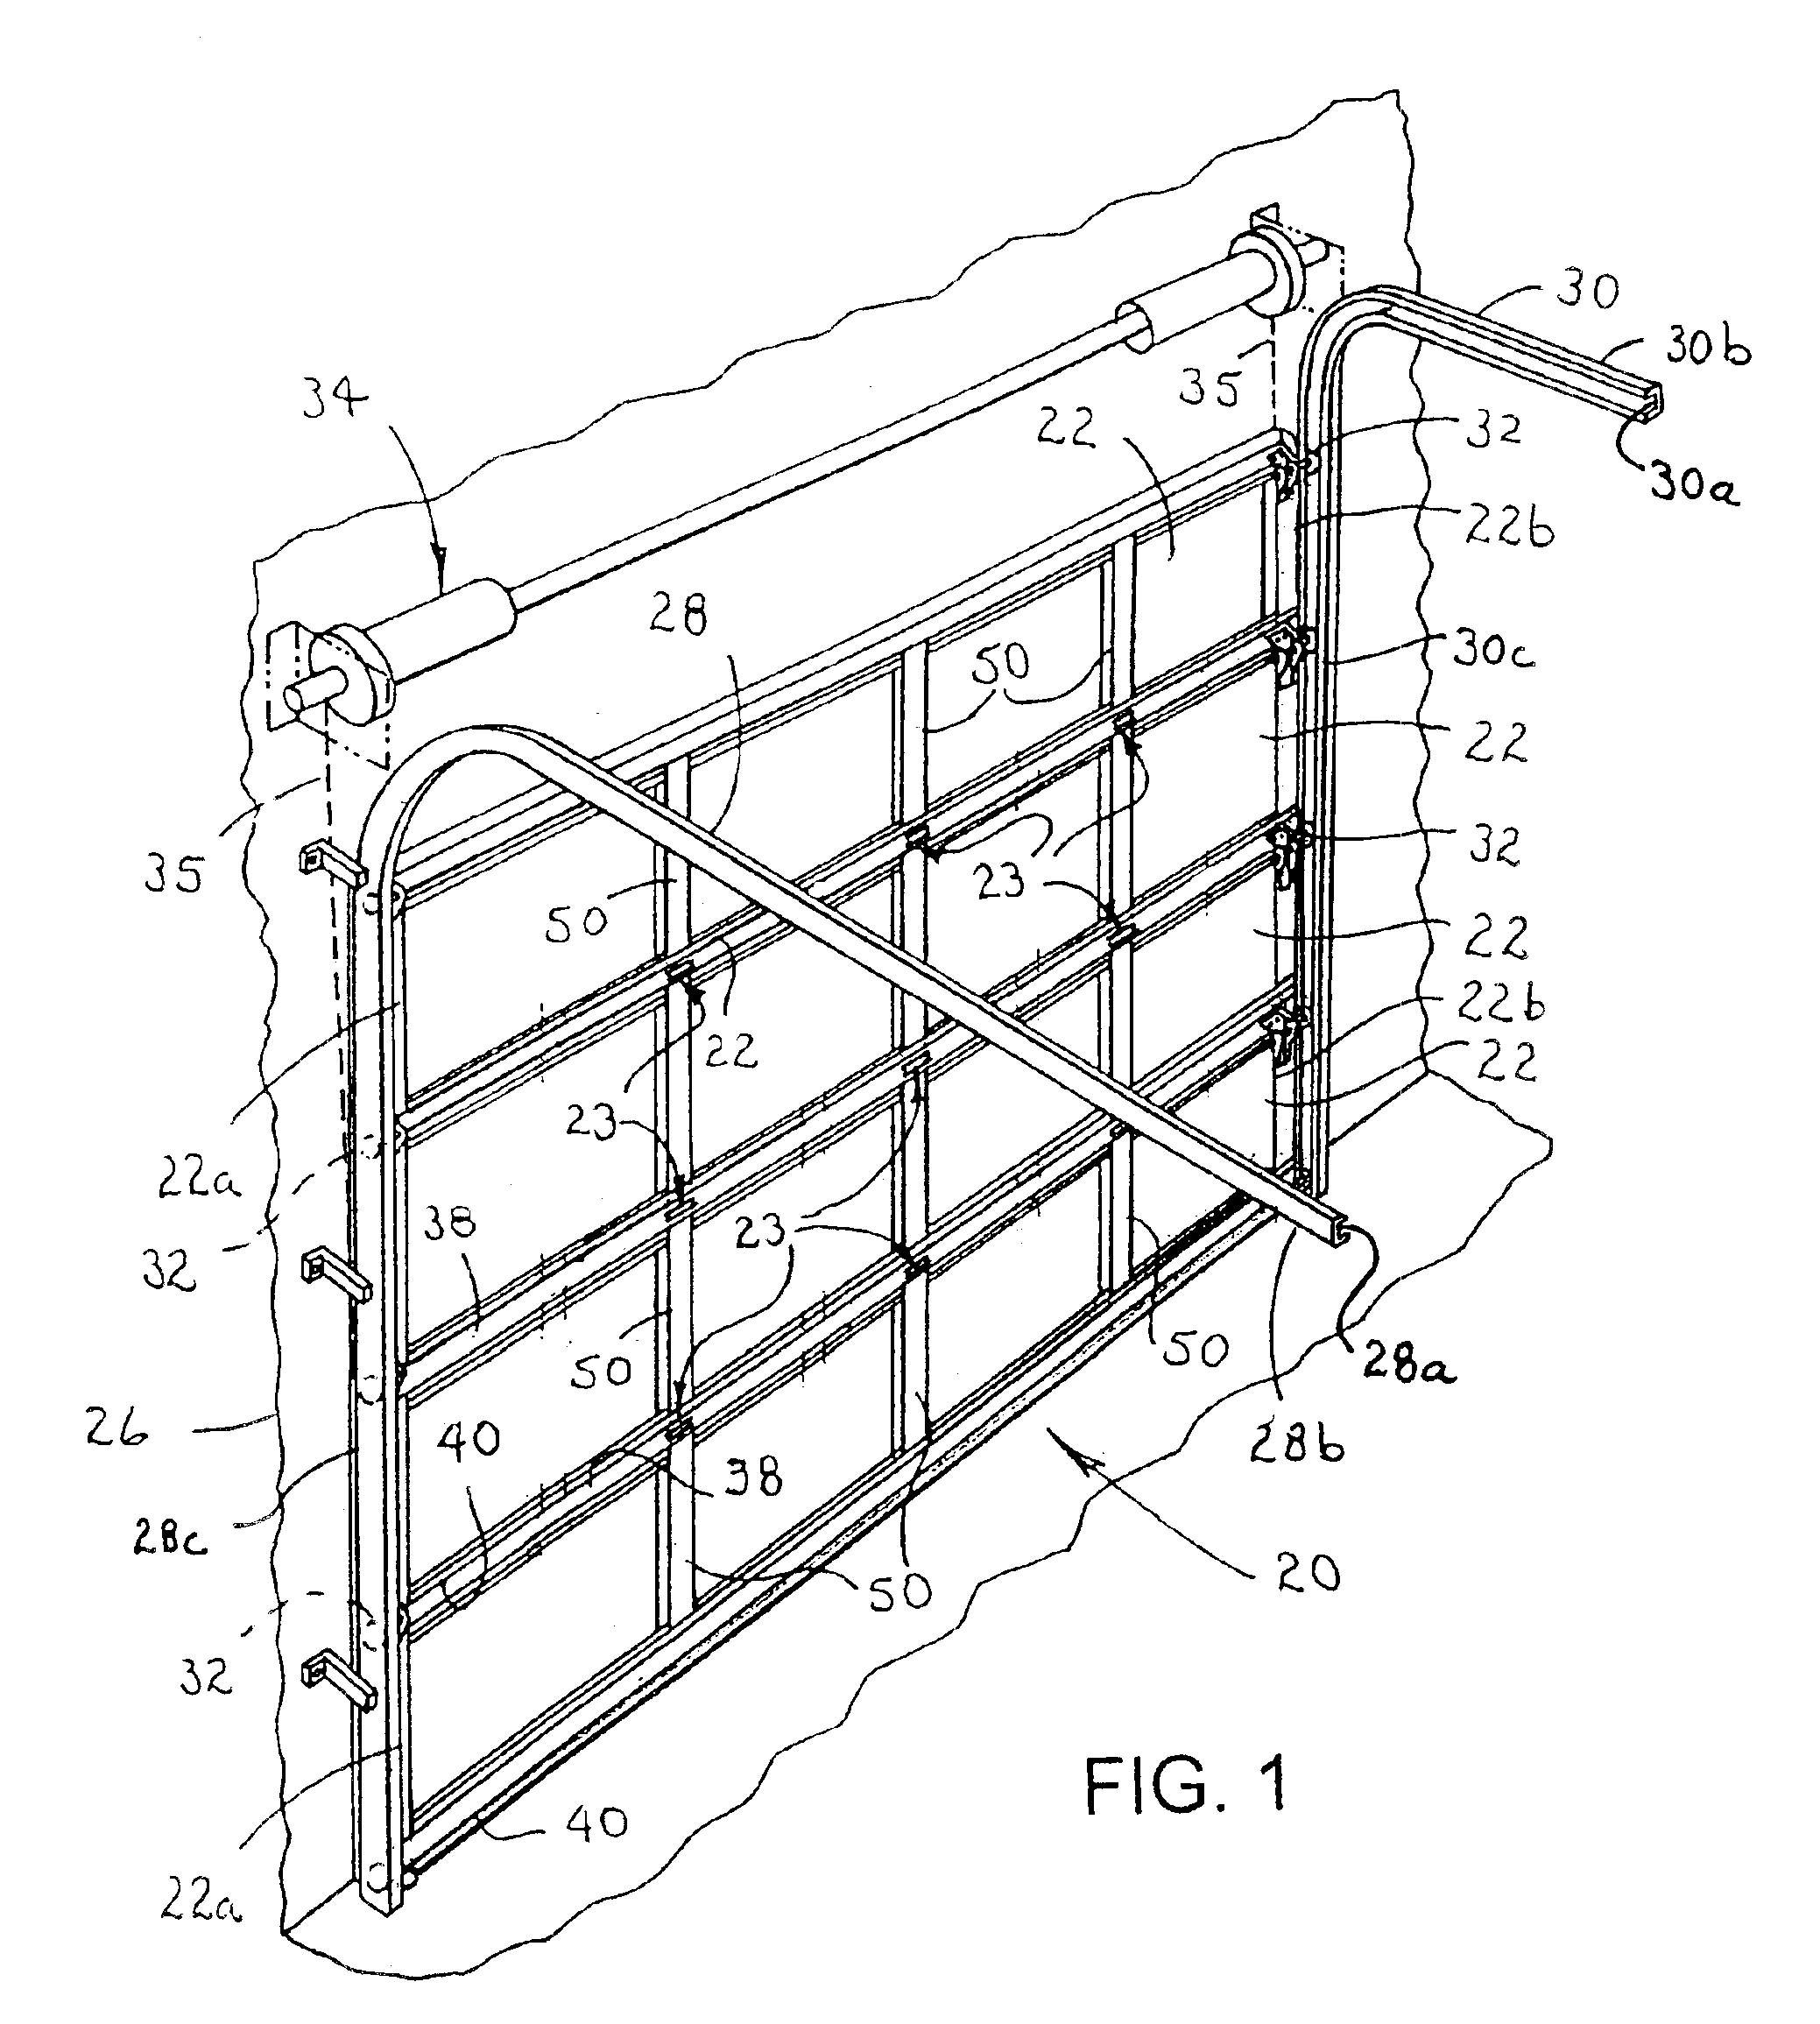 Method of assembly of an upward acting sectional door